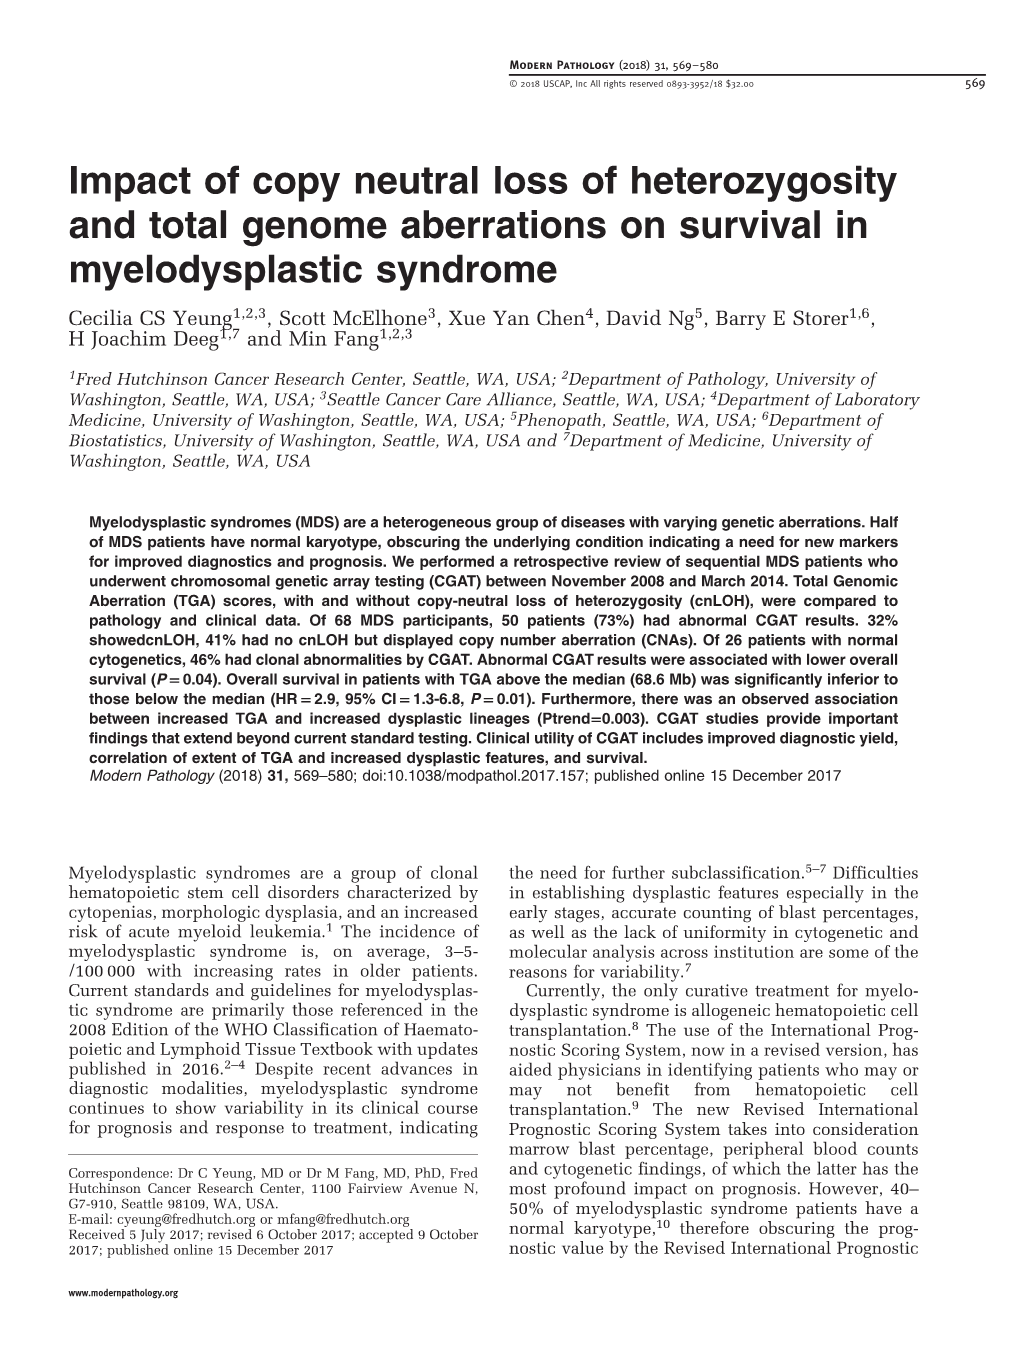 Impact of Copy Neutral Loss of Heterozygosity and Total Genome